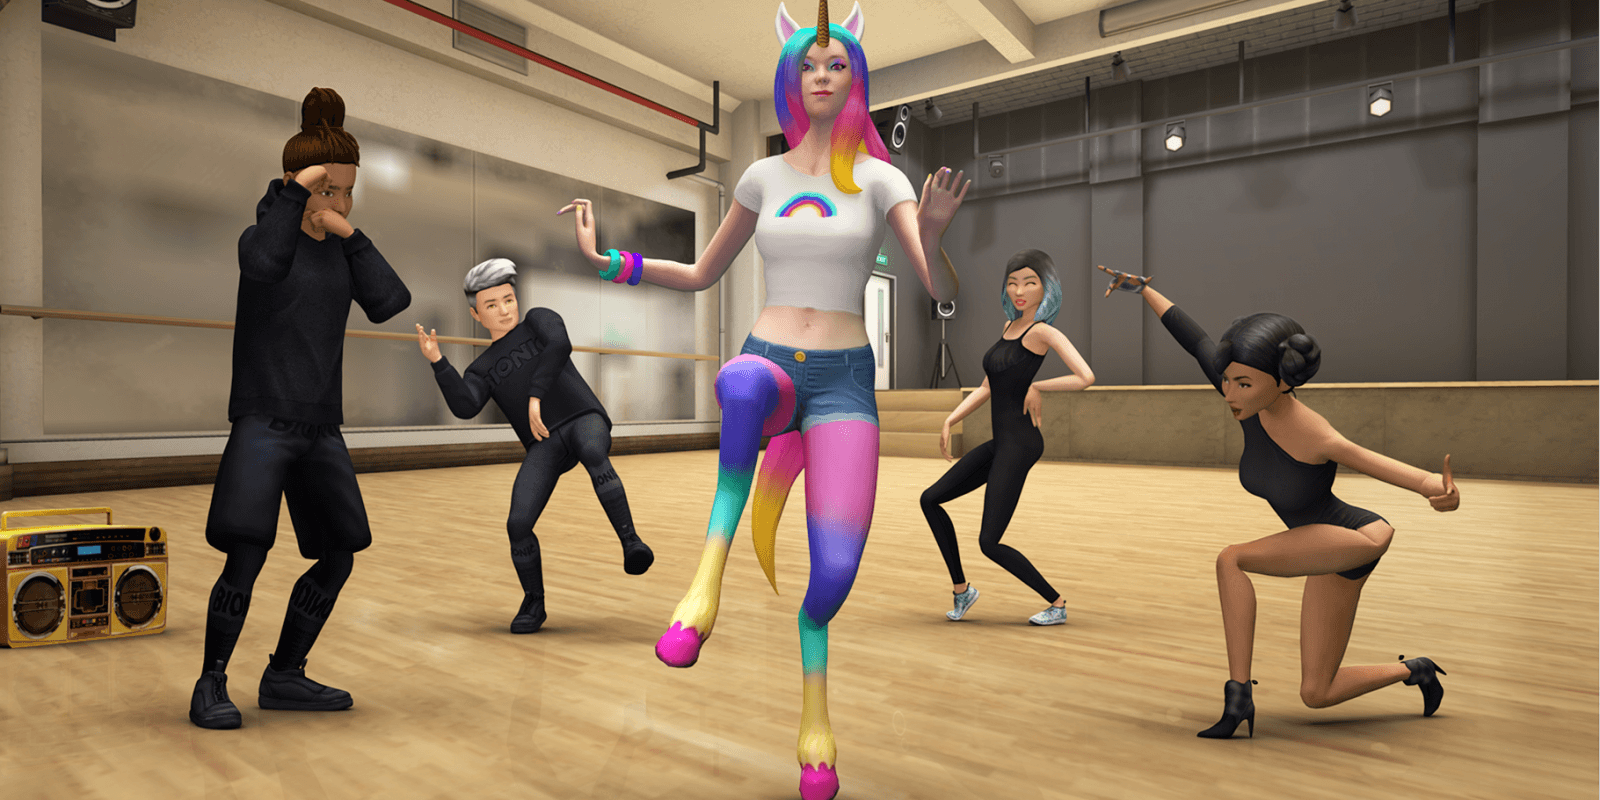 Have you found the Dancing Unicorn today? - Avakin